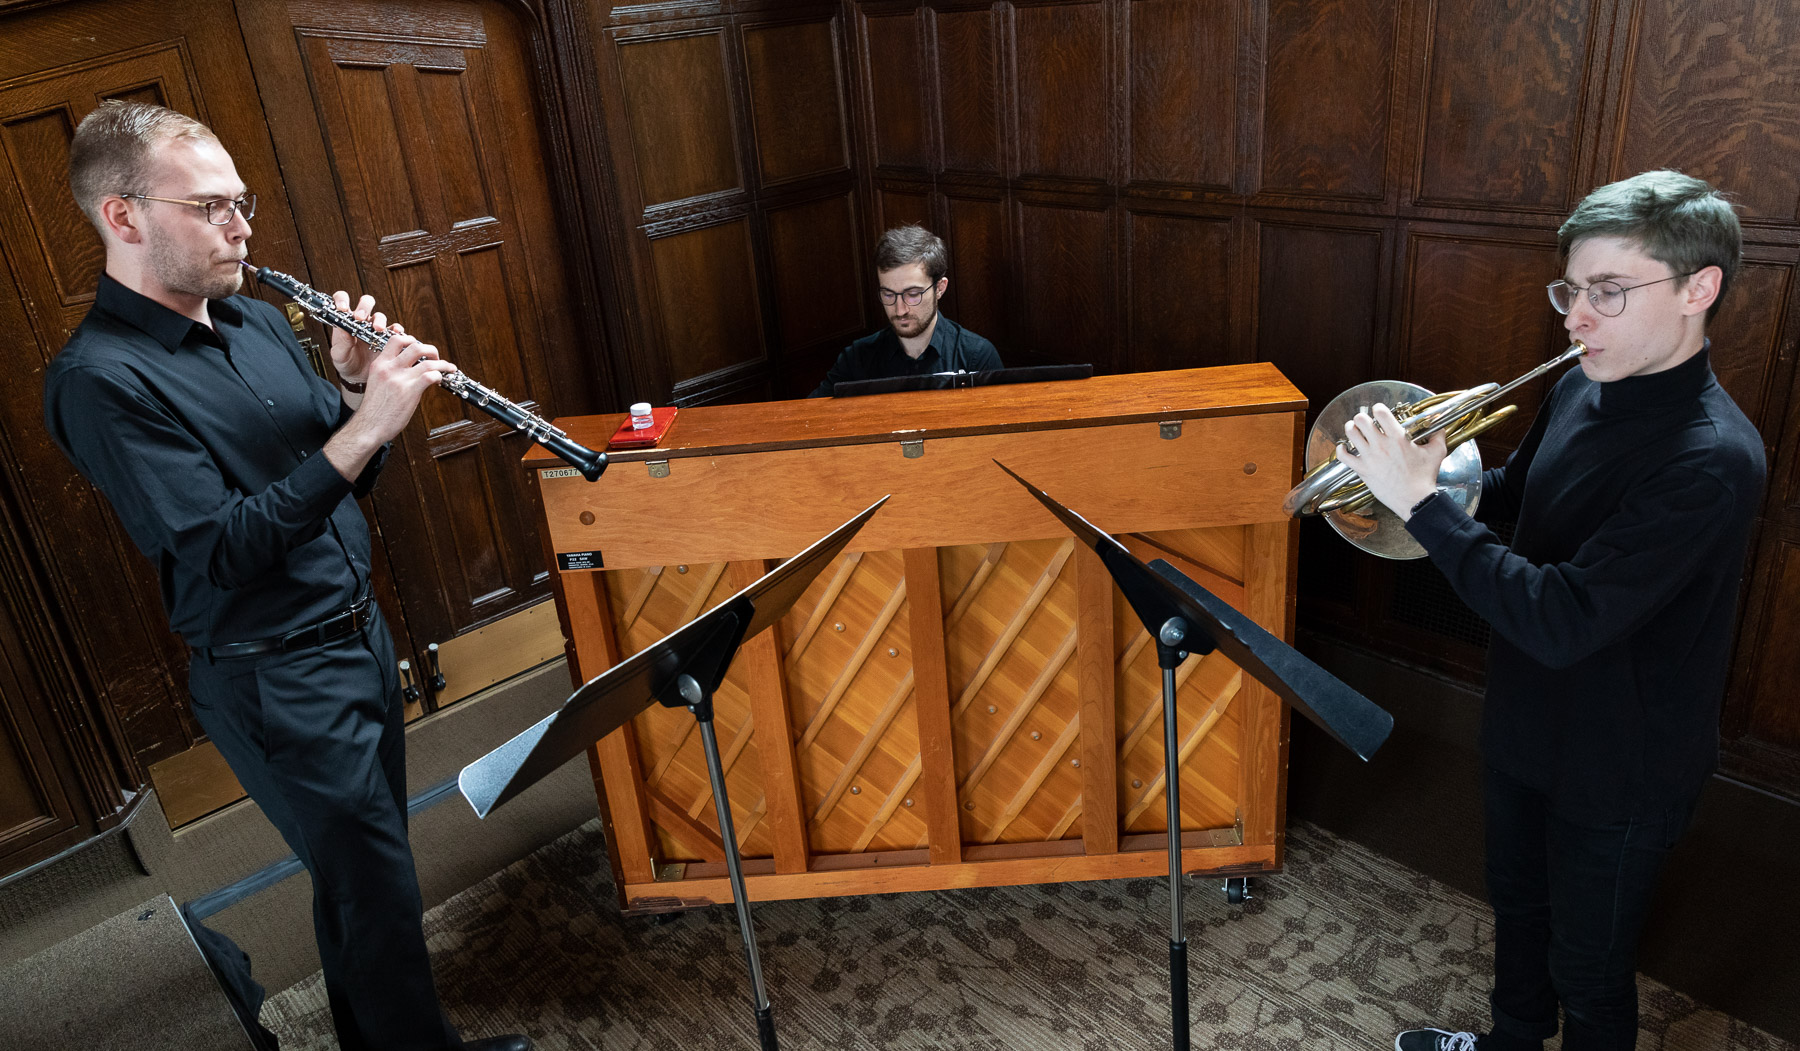 Left to right, Ian Egeberg, Ryan Senger and Jacob Nelson, students in the School of Music, performed at the breakfast hosted by the Office of Institutional Diversity and Equity. (DePaul University/Jeff Carrion)